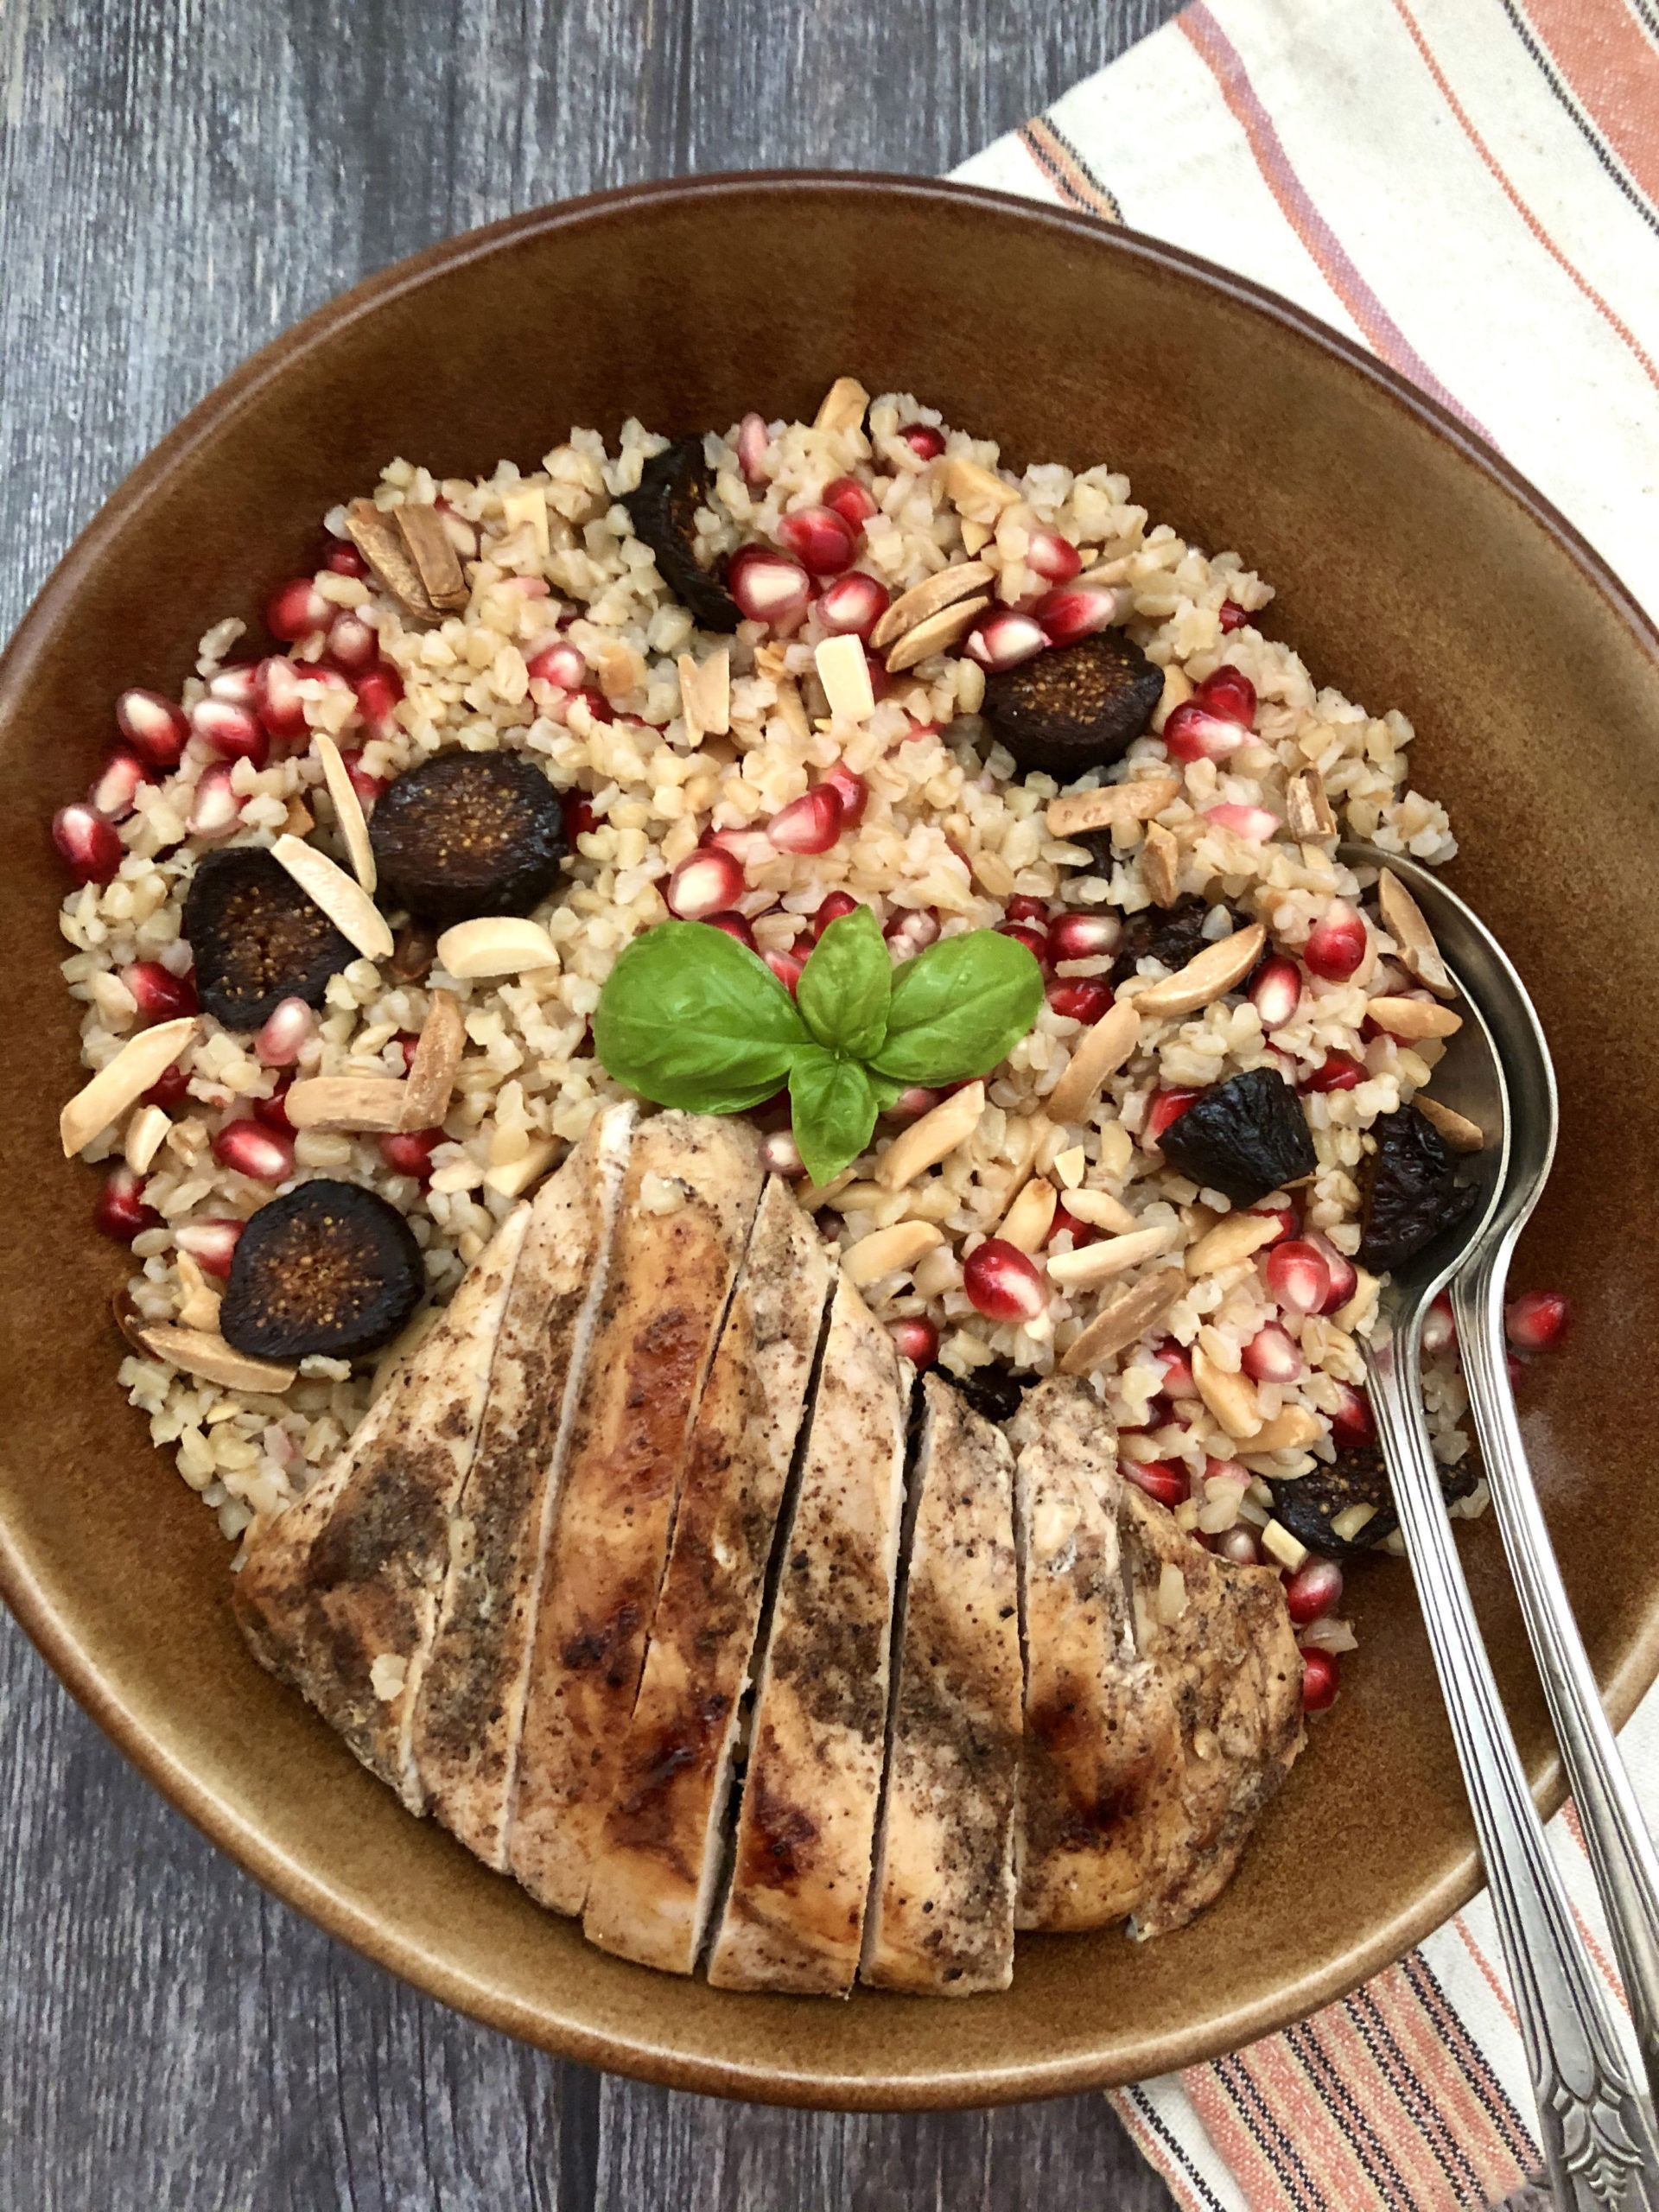 https://valleyfig.com/wp-content/uploads/2020/09/Chicken-Wheat-Bulgur-Salad-with-Figs-credit-Wafa-Shami_1775V-scaled.jpg